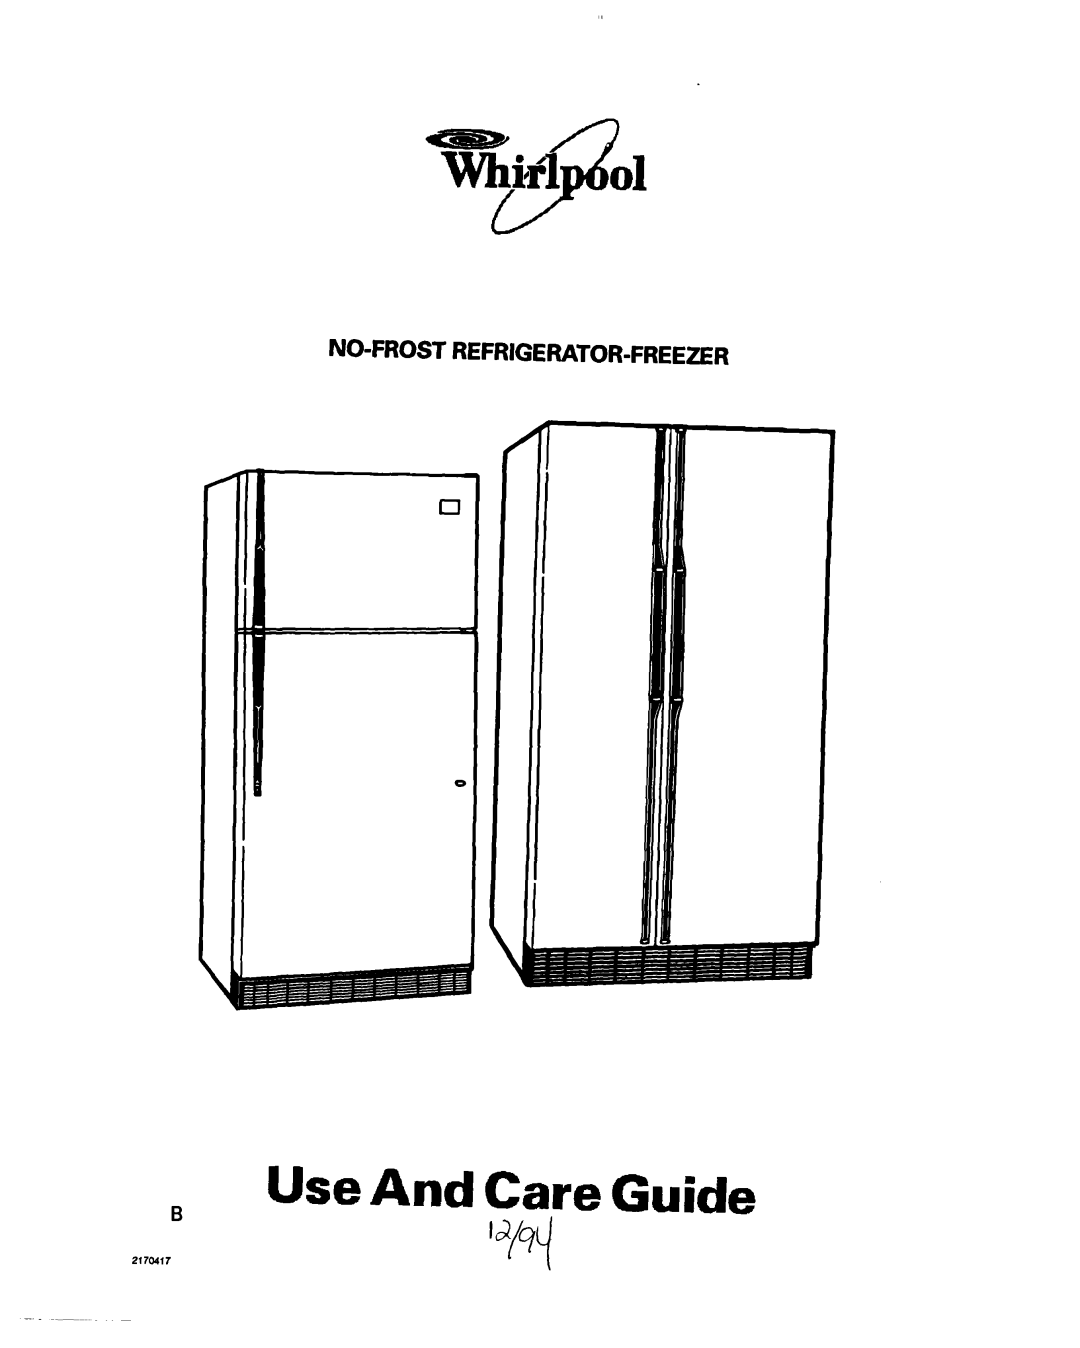 Whirlpool 3ET16NKXDG00 manual Use And Care Guide, No-Frost Refrigerator-Freezer, 2170417 